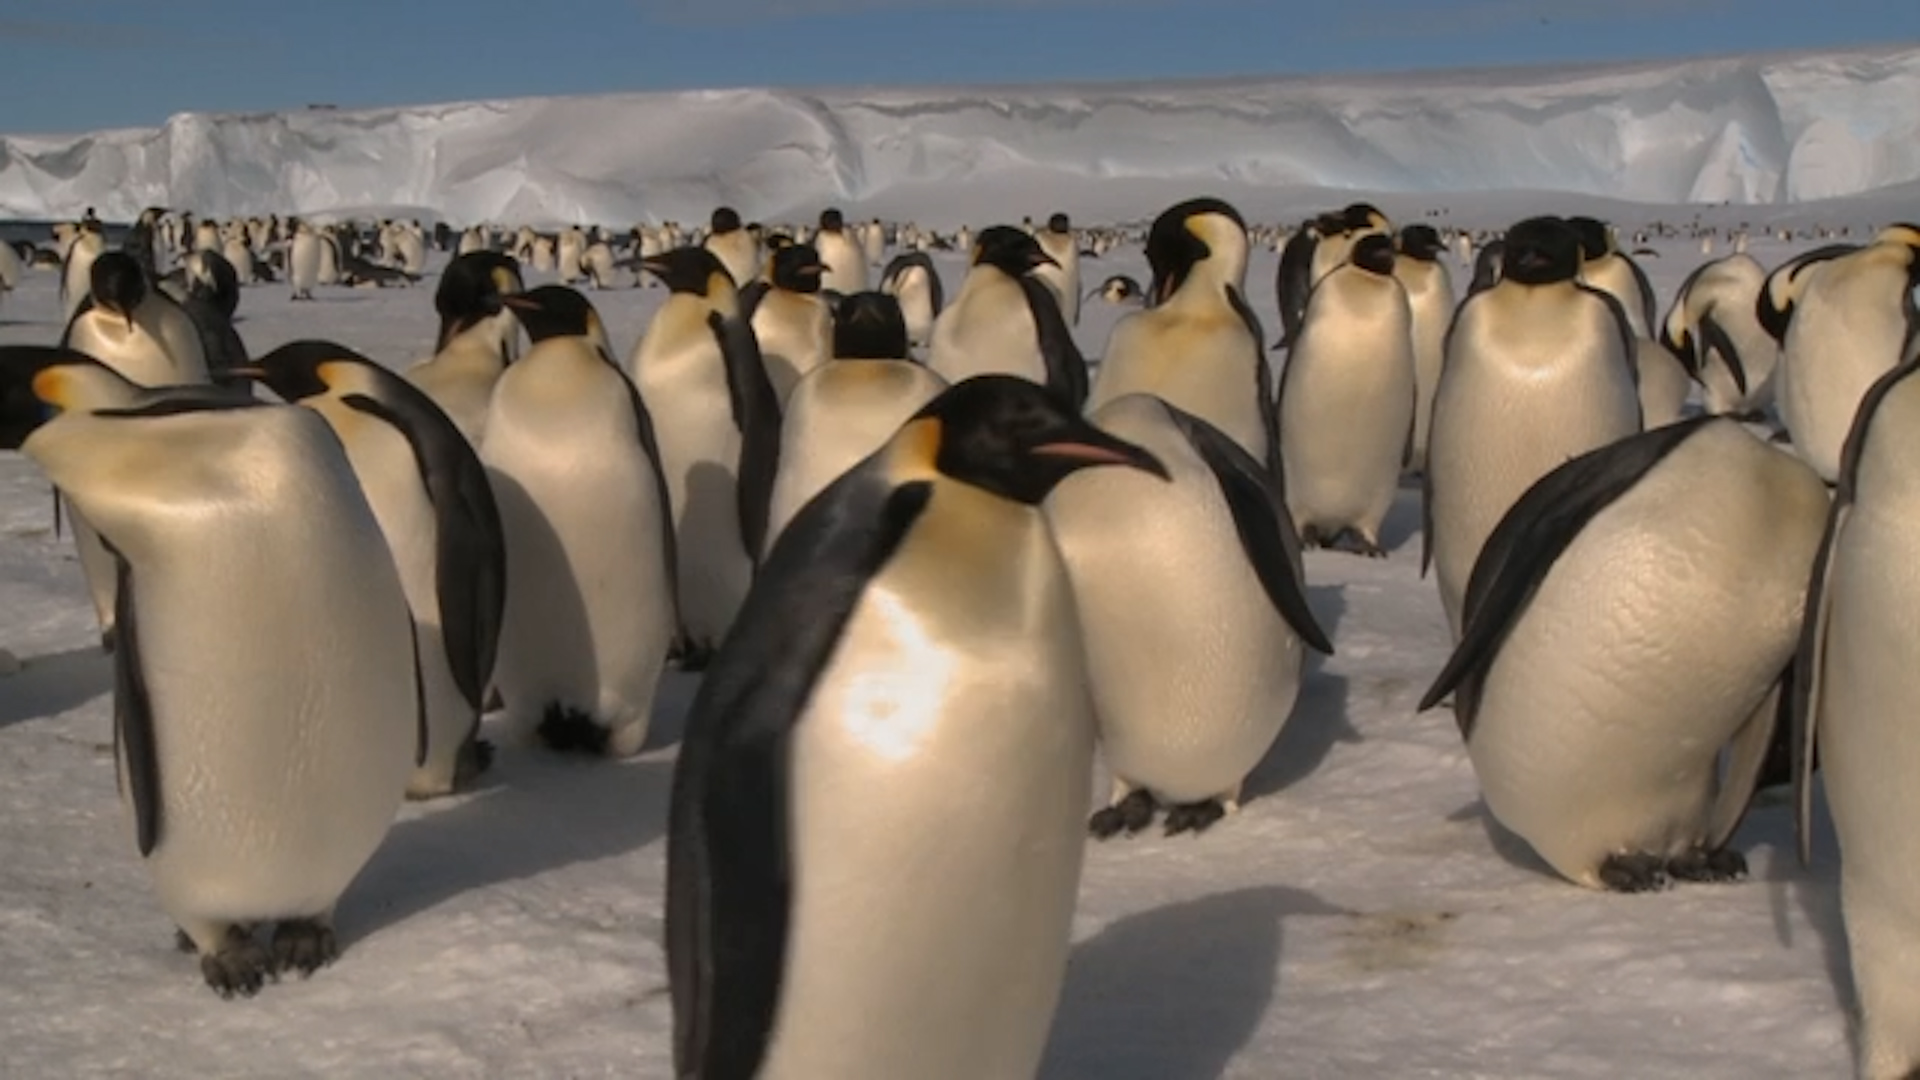 Emperor penguins are now a threatened species due to climate change, U.S.  officials say